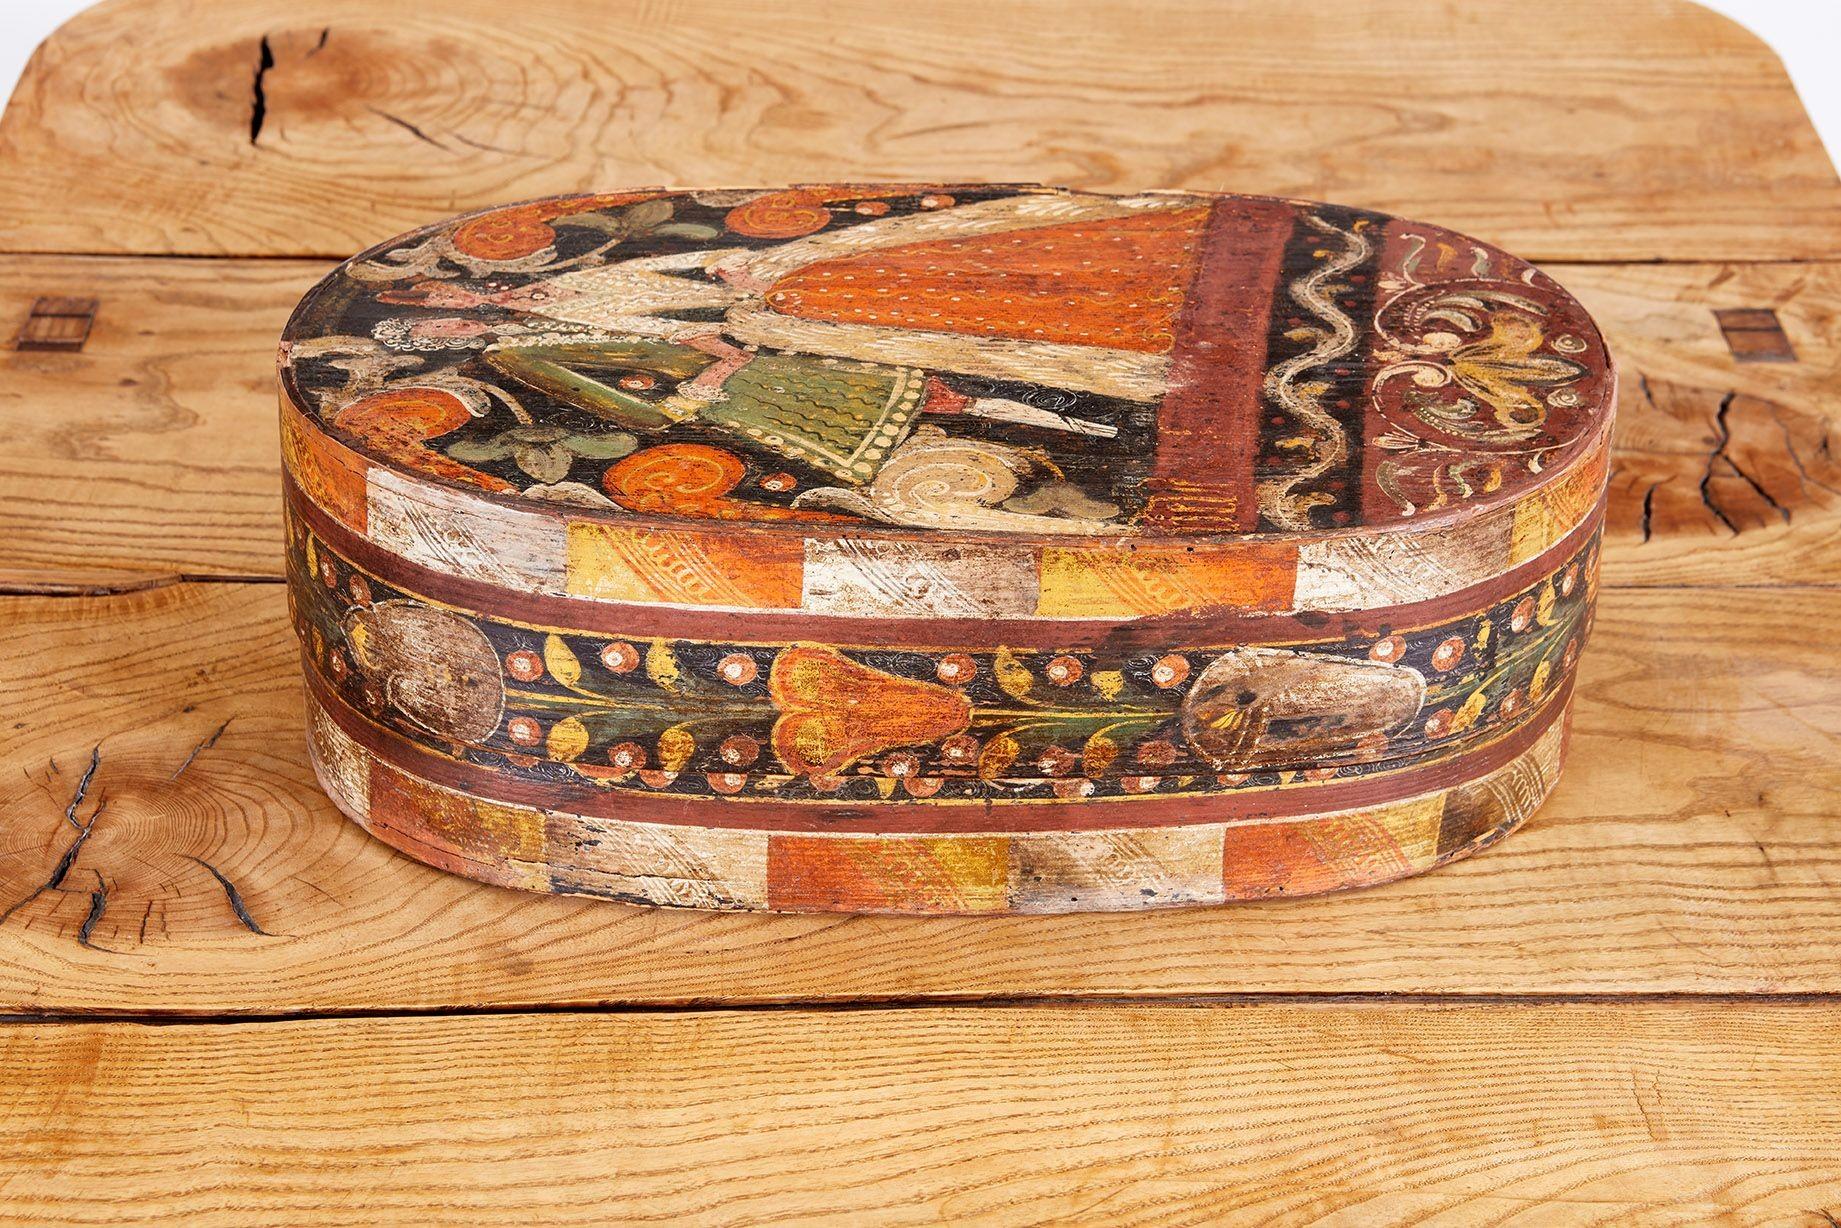 Very fine 18th century Swedish painted oval pantry box made to celebrate a wedding, depicting a loving couple in their period finery, surrounded by border of fruits and flowers, the underside with branded owner's initials 